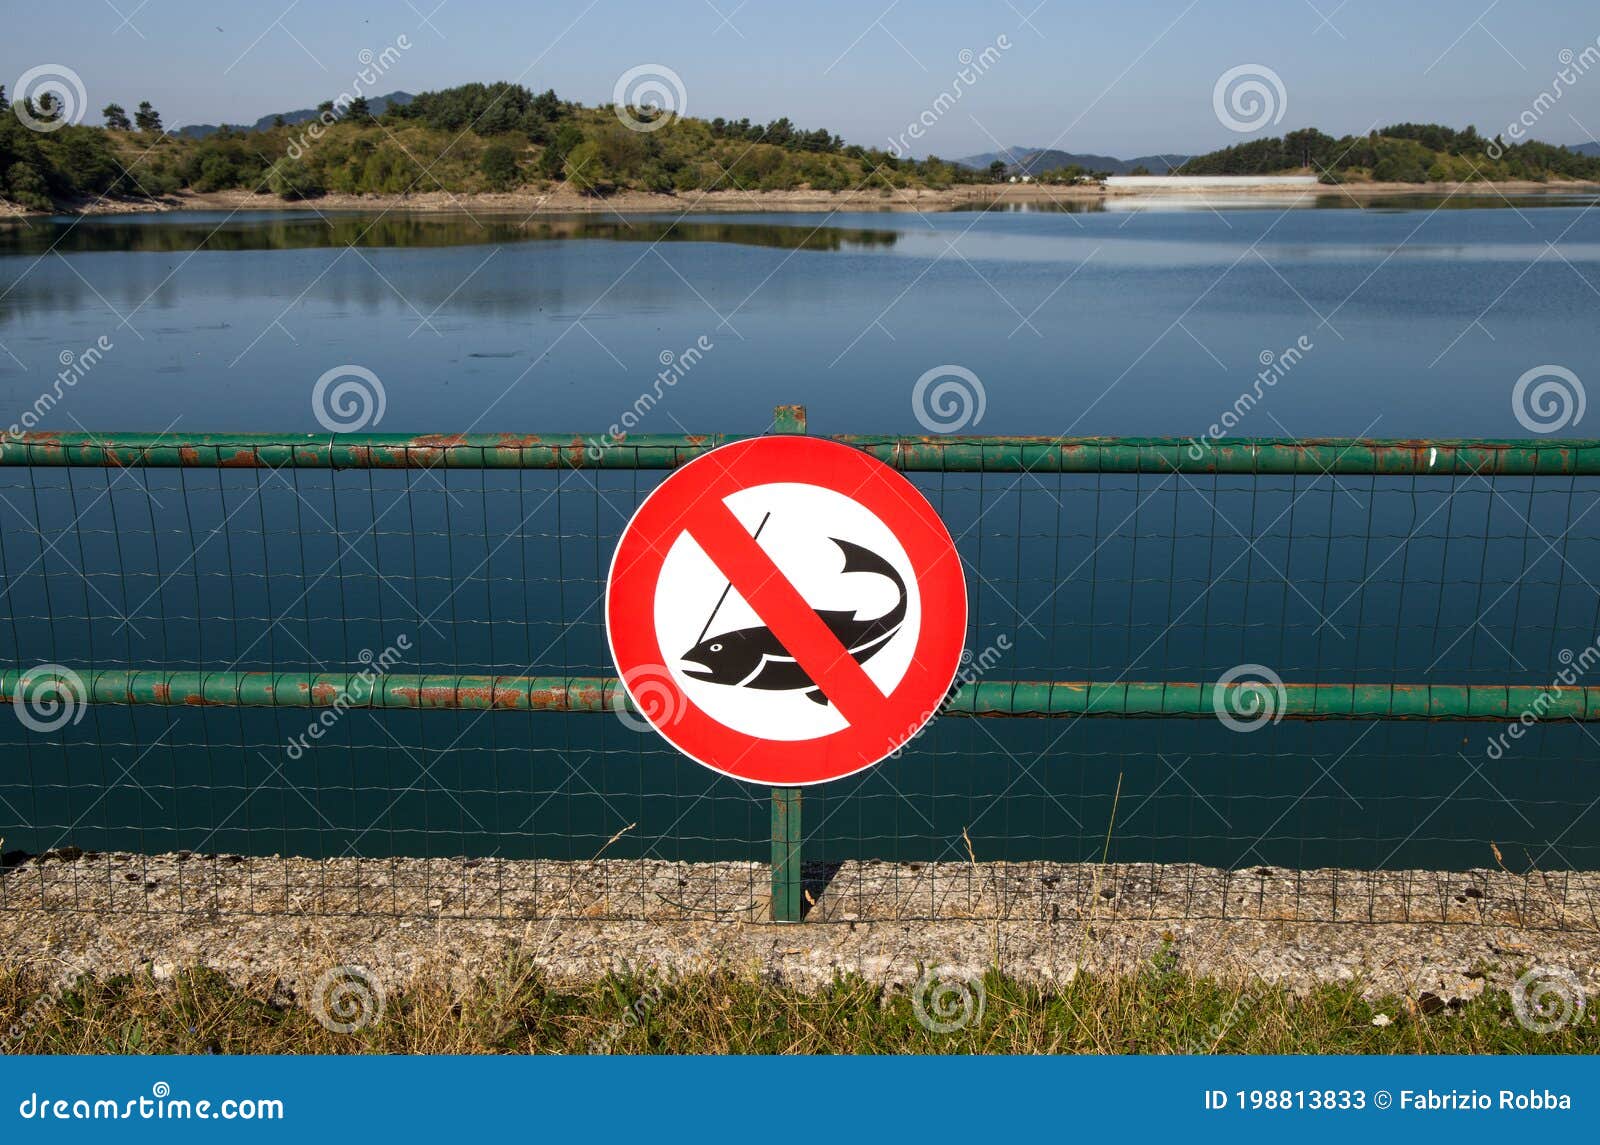 no fishing sign on giacopiane lake, an artificial reservoir located in the sturla valley in the municipality of borzonasca, inland